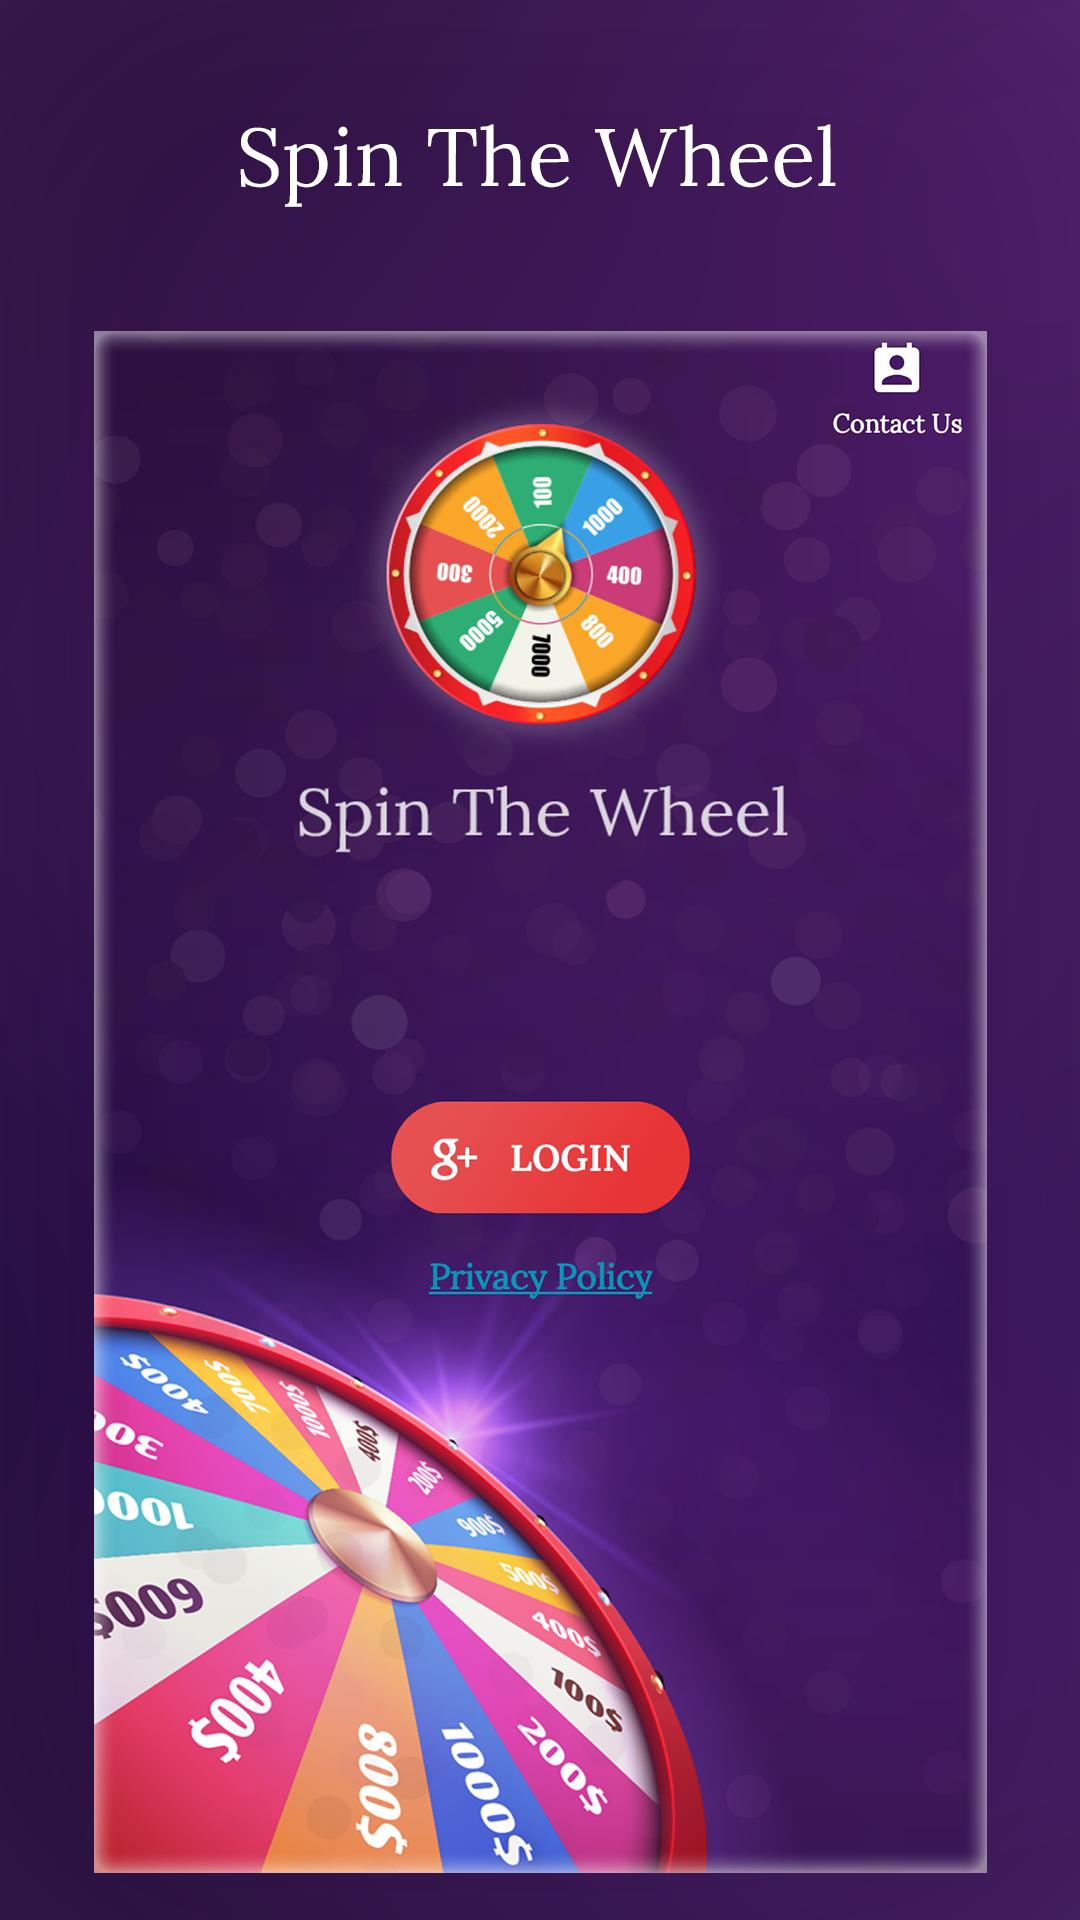 Spin download. Spin game. Spin the Wheel. Spin the Wheel app. Crazy Spin игра.